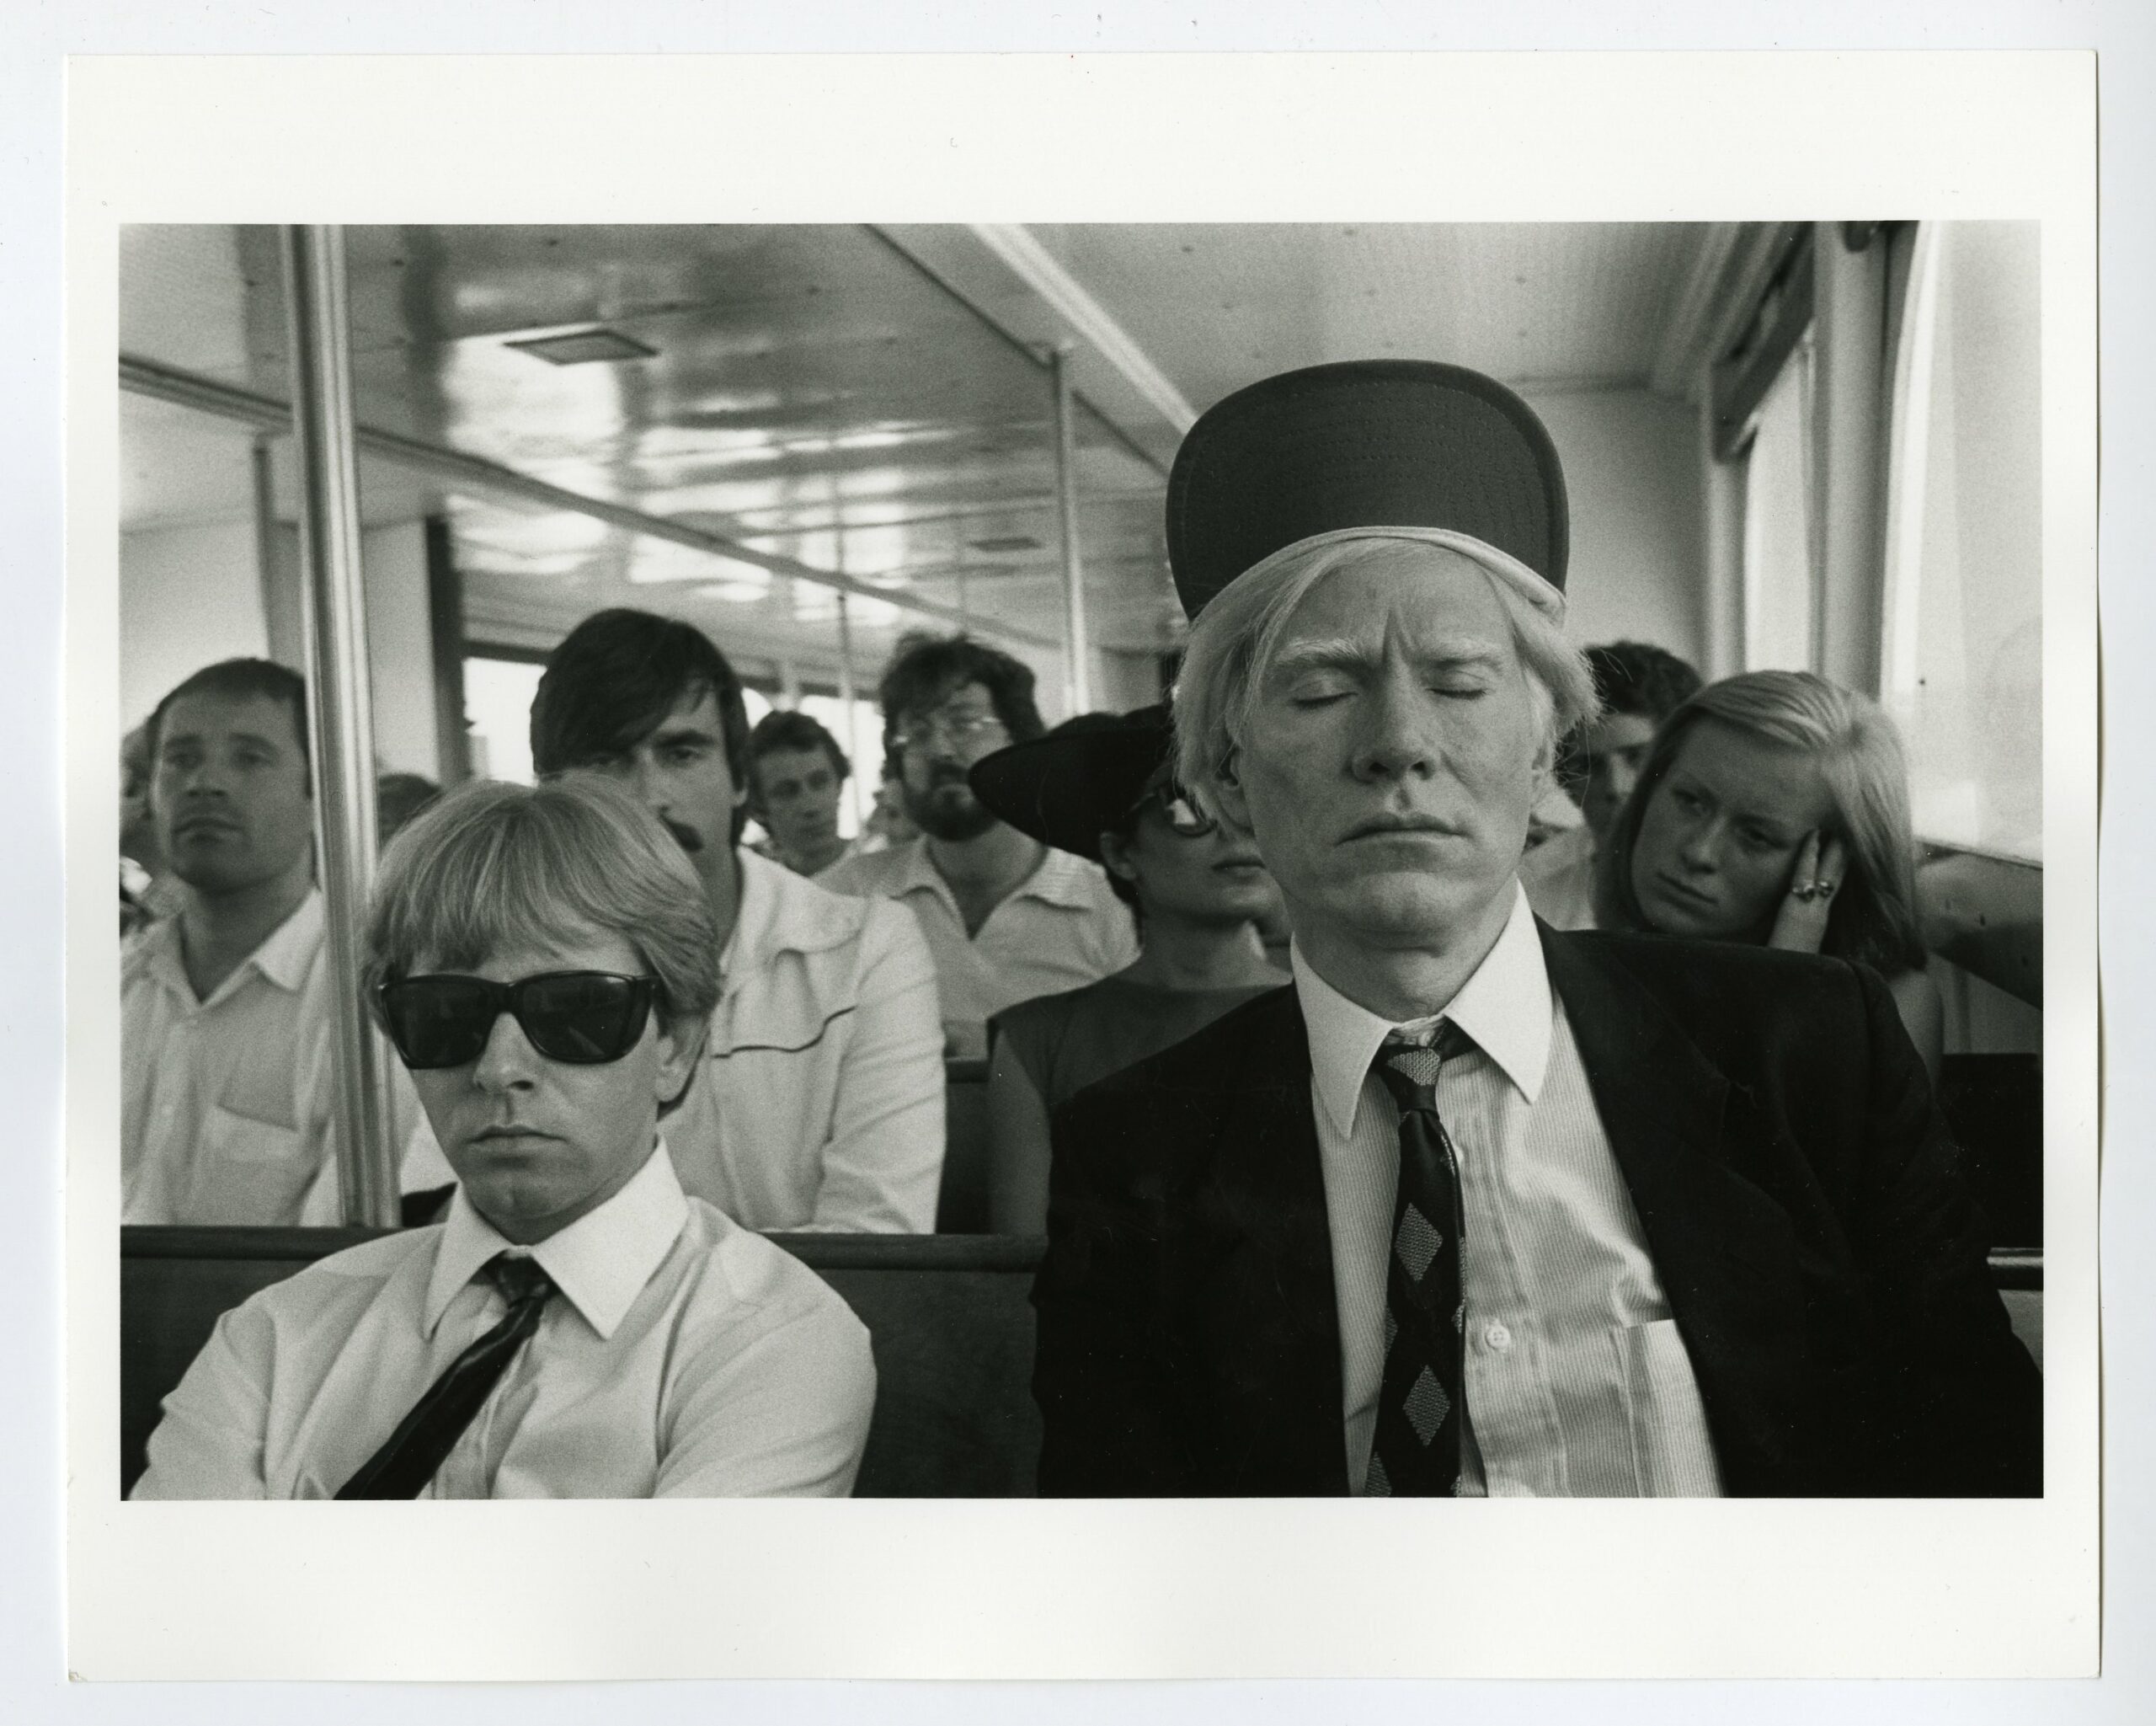 Rupert Smith and Andy, Fire Island Ferry, 1979 BOB COLACELLO COURTESY THE ARTIST AND VITO SCHNABEL GALLERY